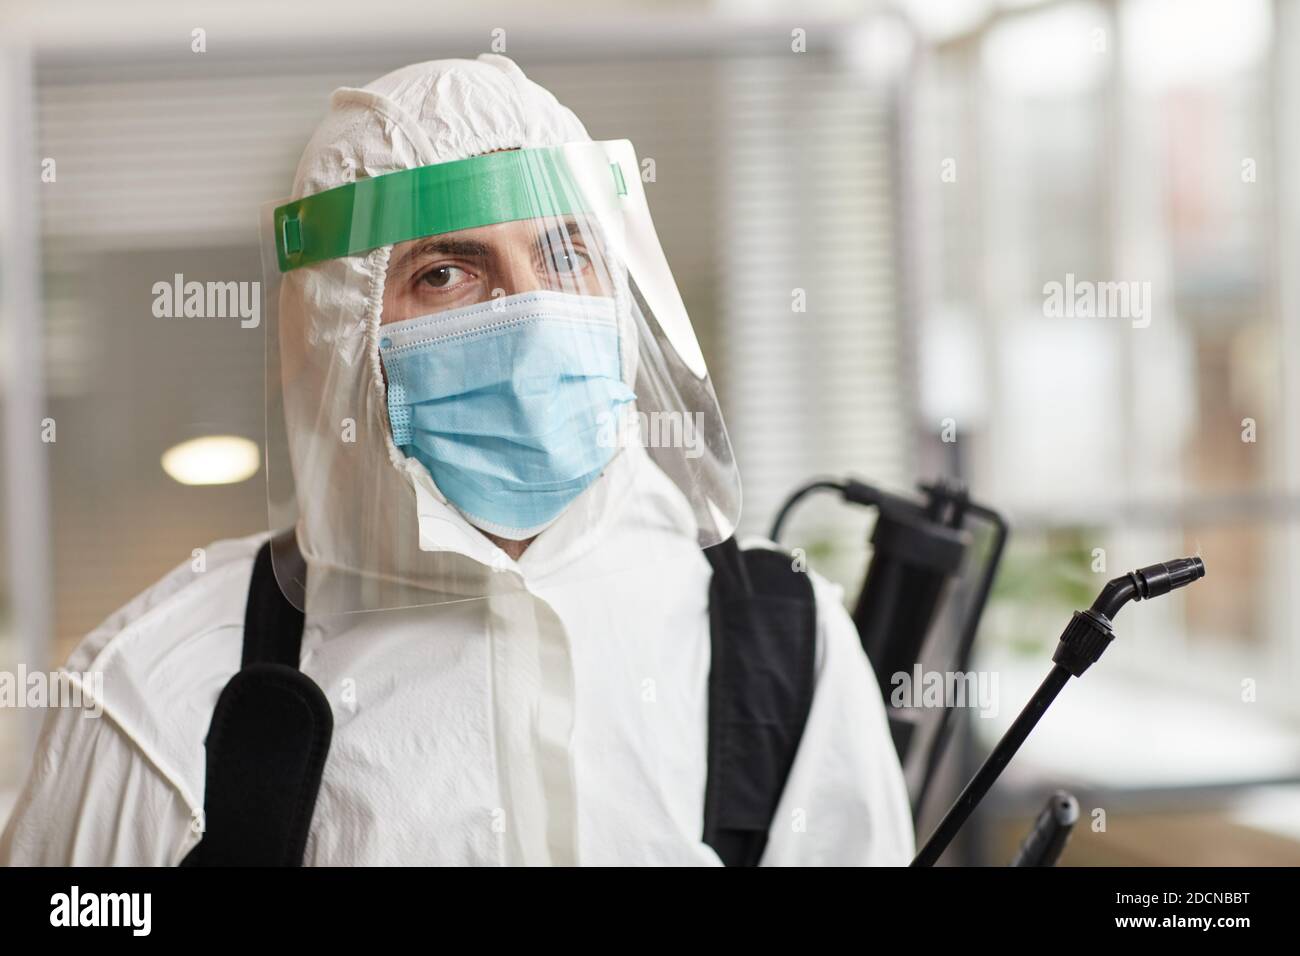 Portrait of male disinfection worker wearing full protective gear and looking at camera while sanitizing office, copy space Stock Photo